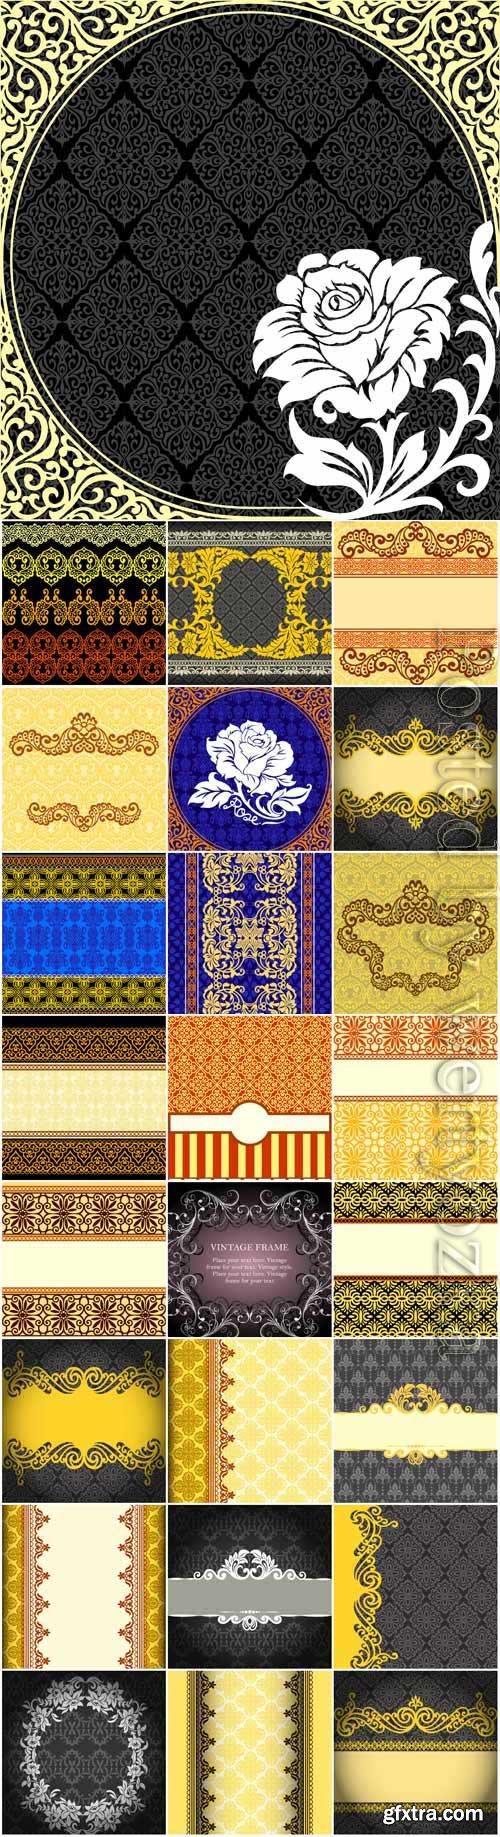 Backgrounds with borders, patterns and ornaments in vector